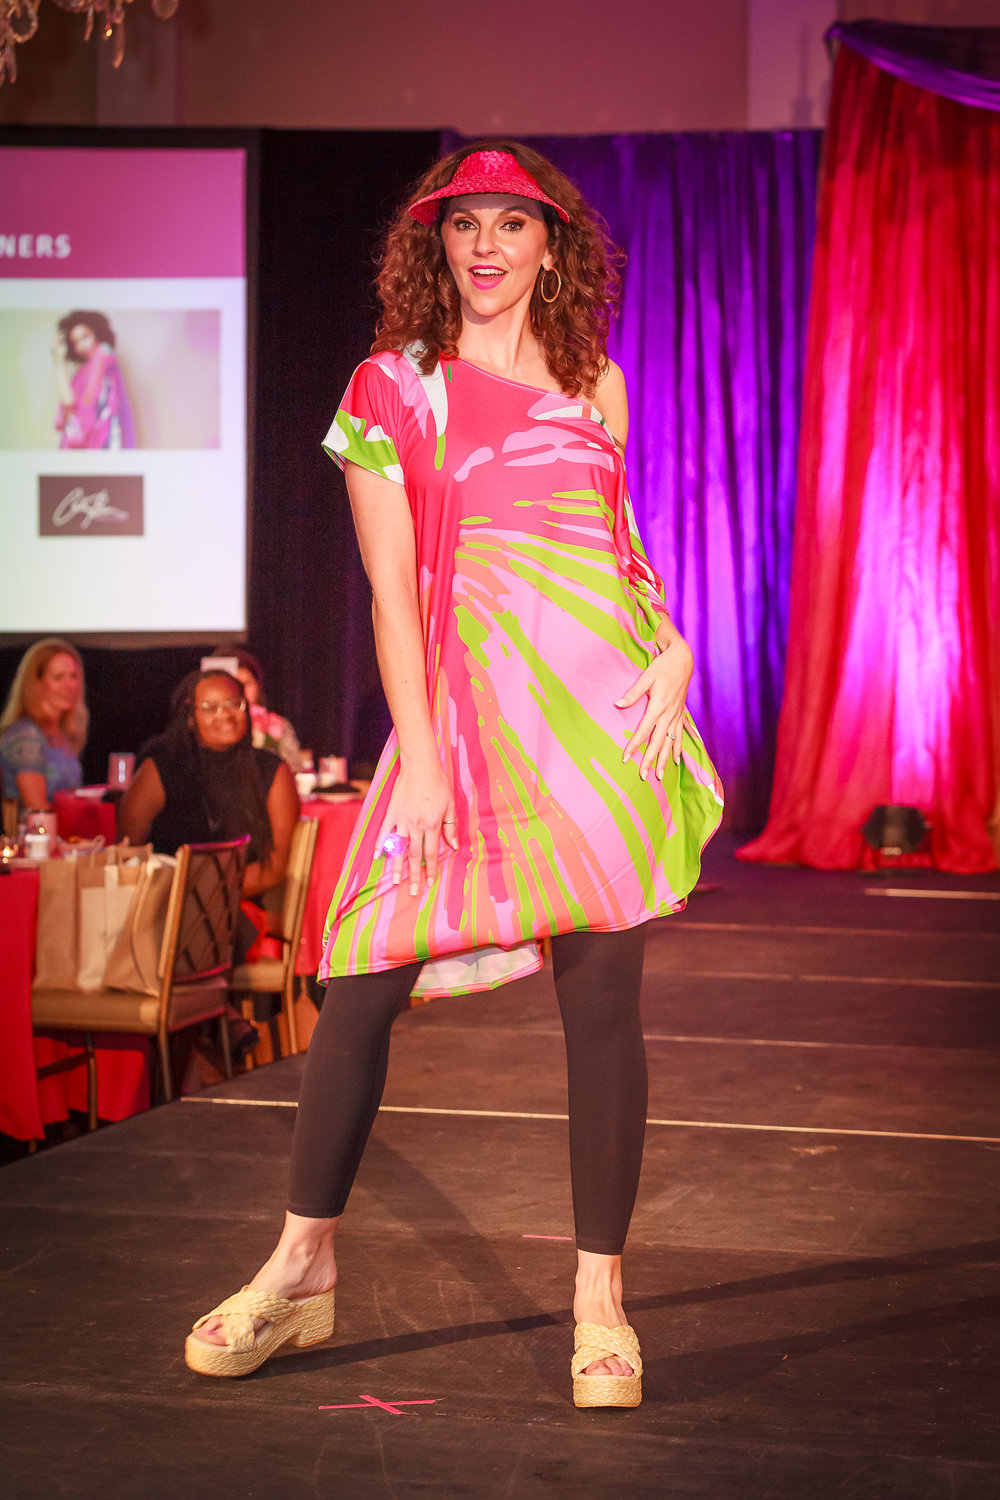 The Wine, Women & Shoes event featured a fashion show.